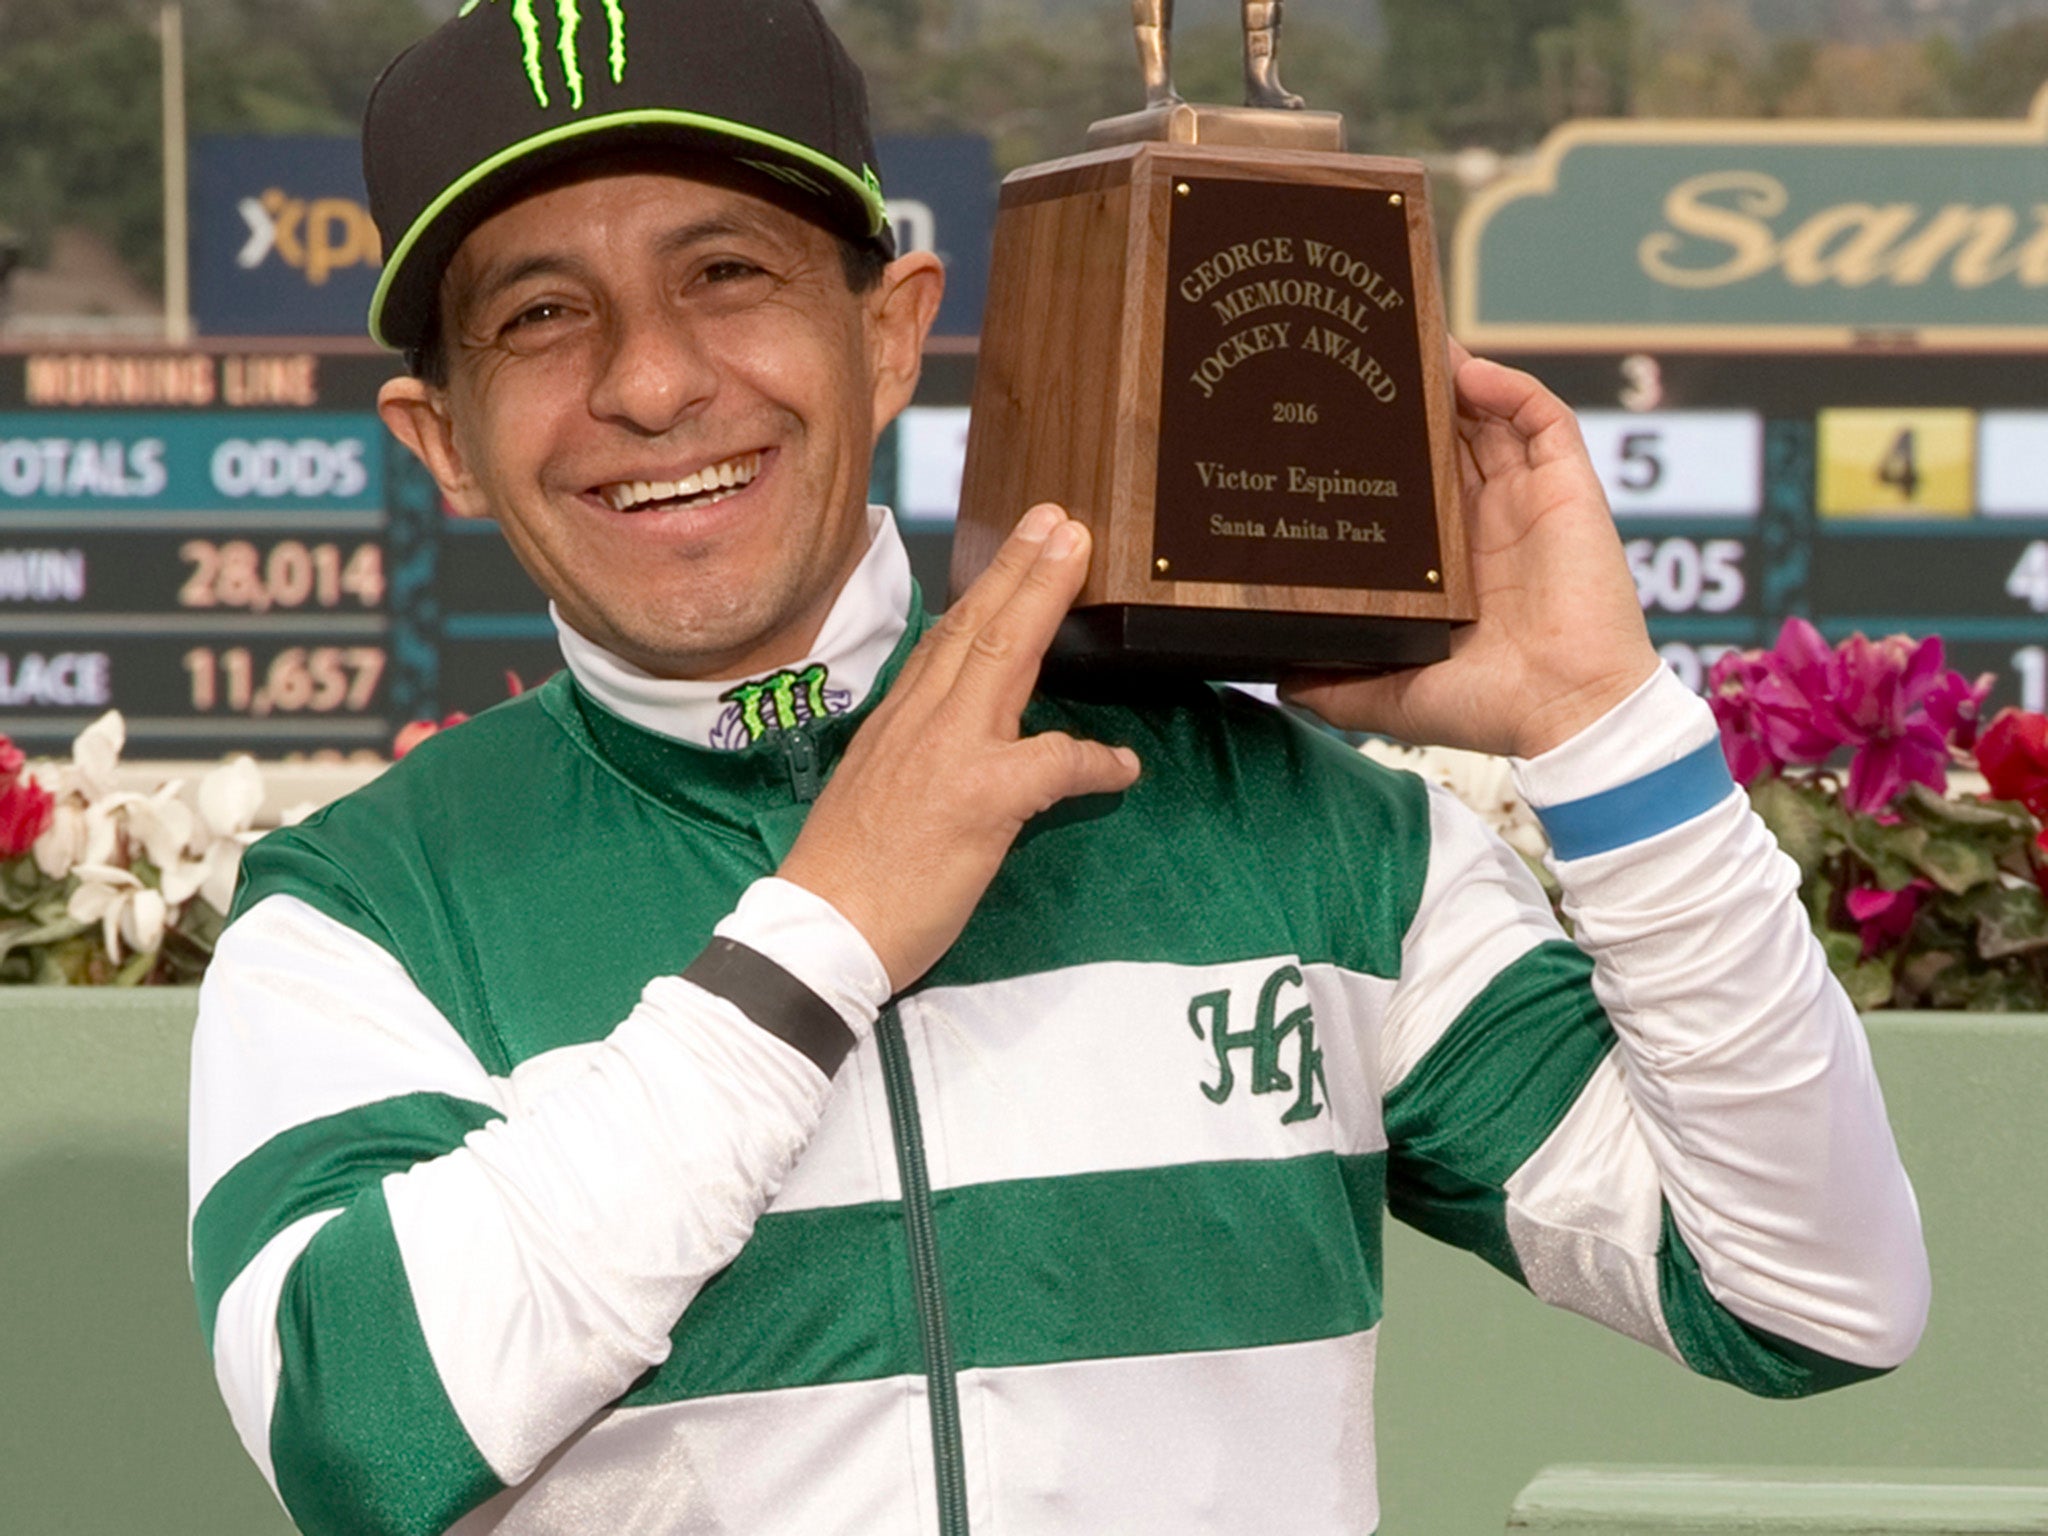 Triple Crown champion jockey Victor Espinoza, a 43-year-old native of Mexico City, poses for a photo with his trophy he received in a winnerís circle ceremony at Santa Anita Park, Arcadia, Calif.